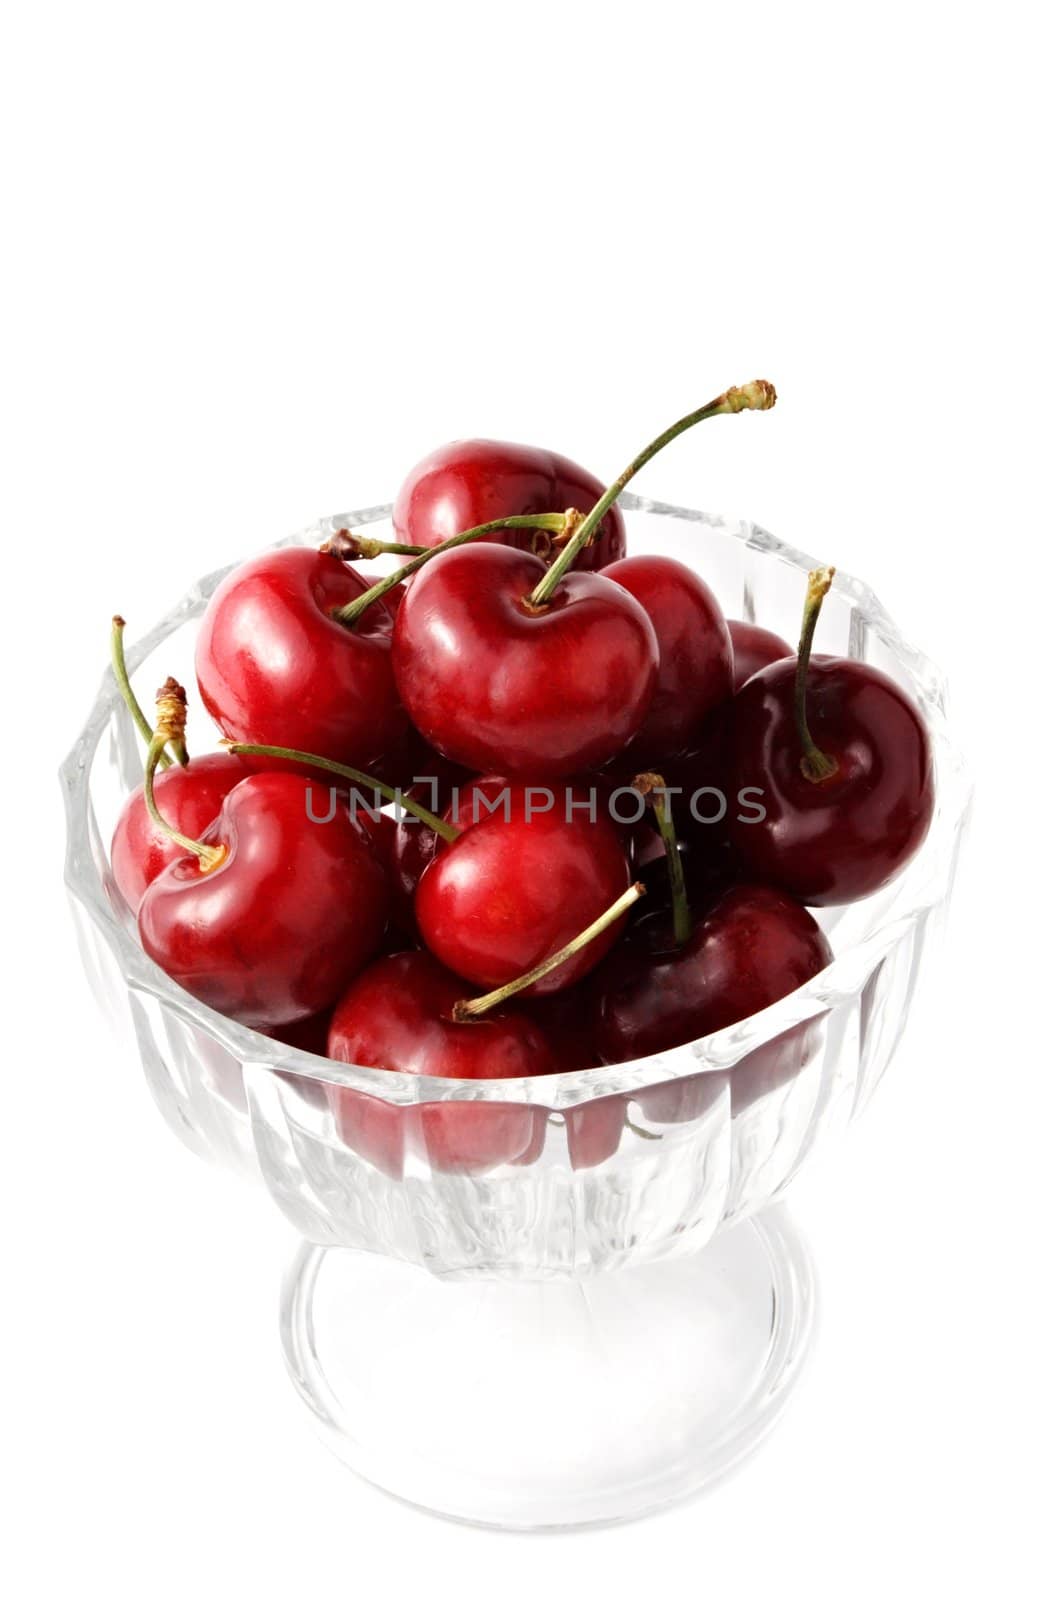 cherries in a glass bowl, isolated on white